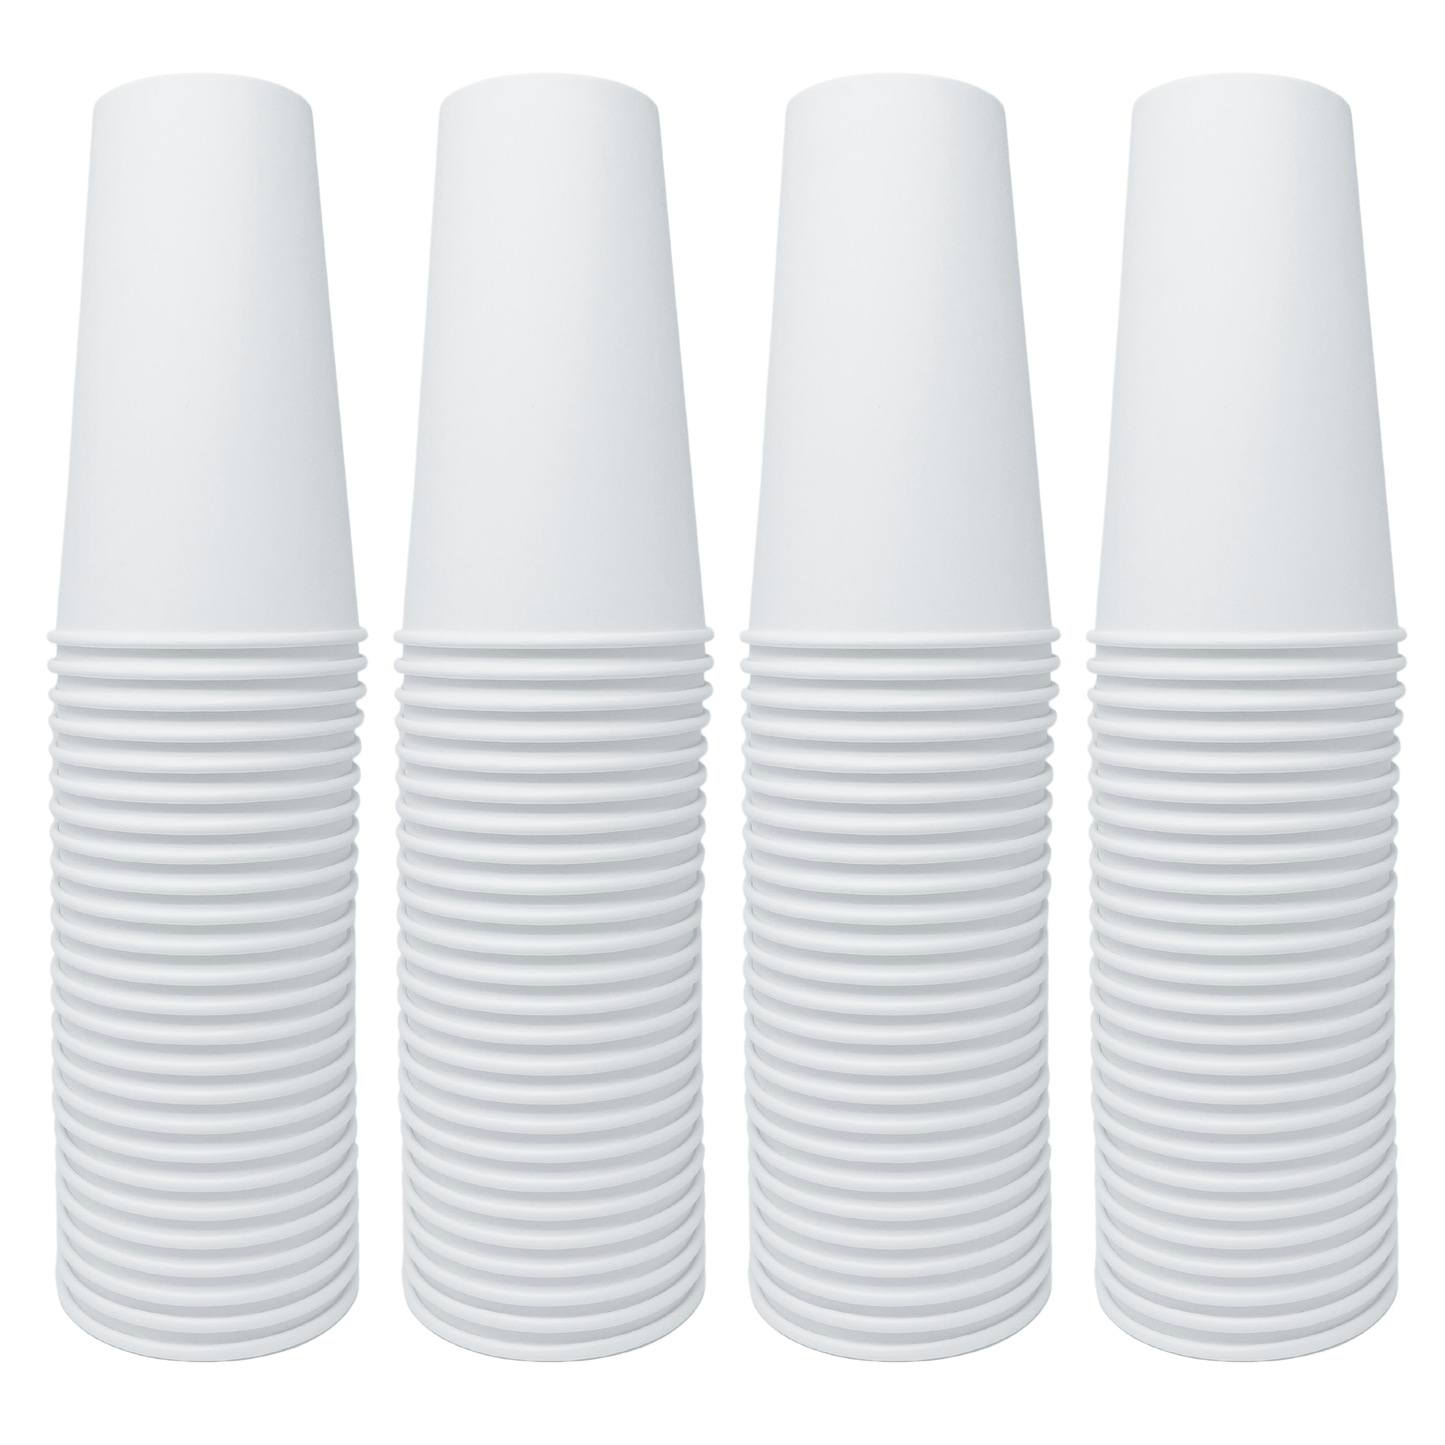 EJY IMPORT Hot Paper Cups (White)